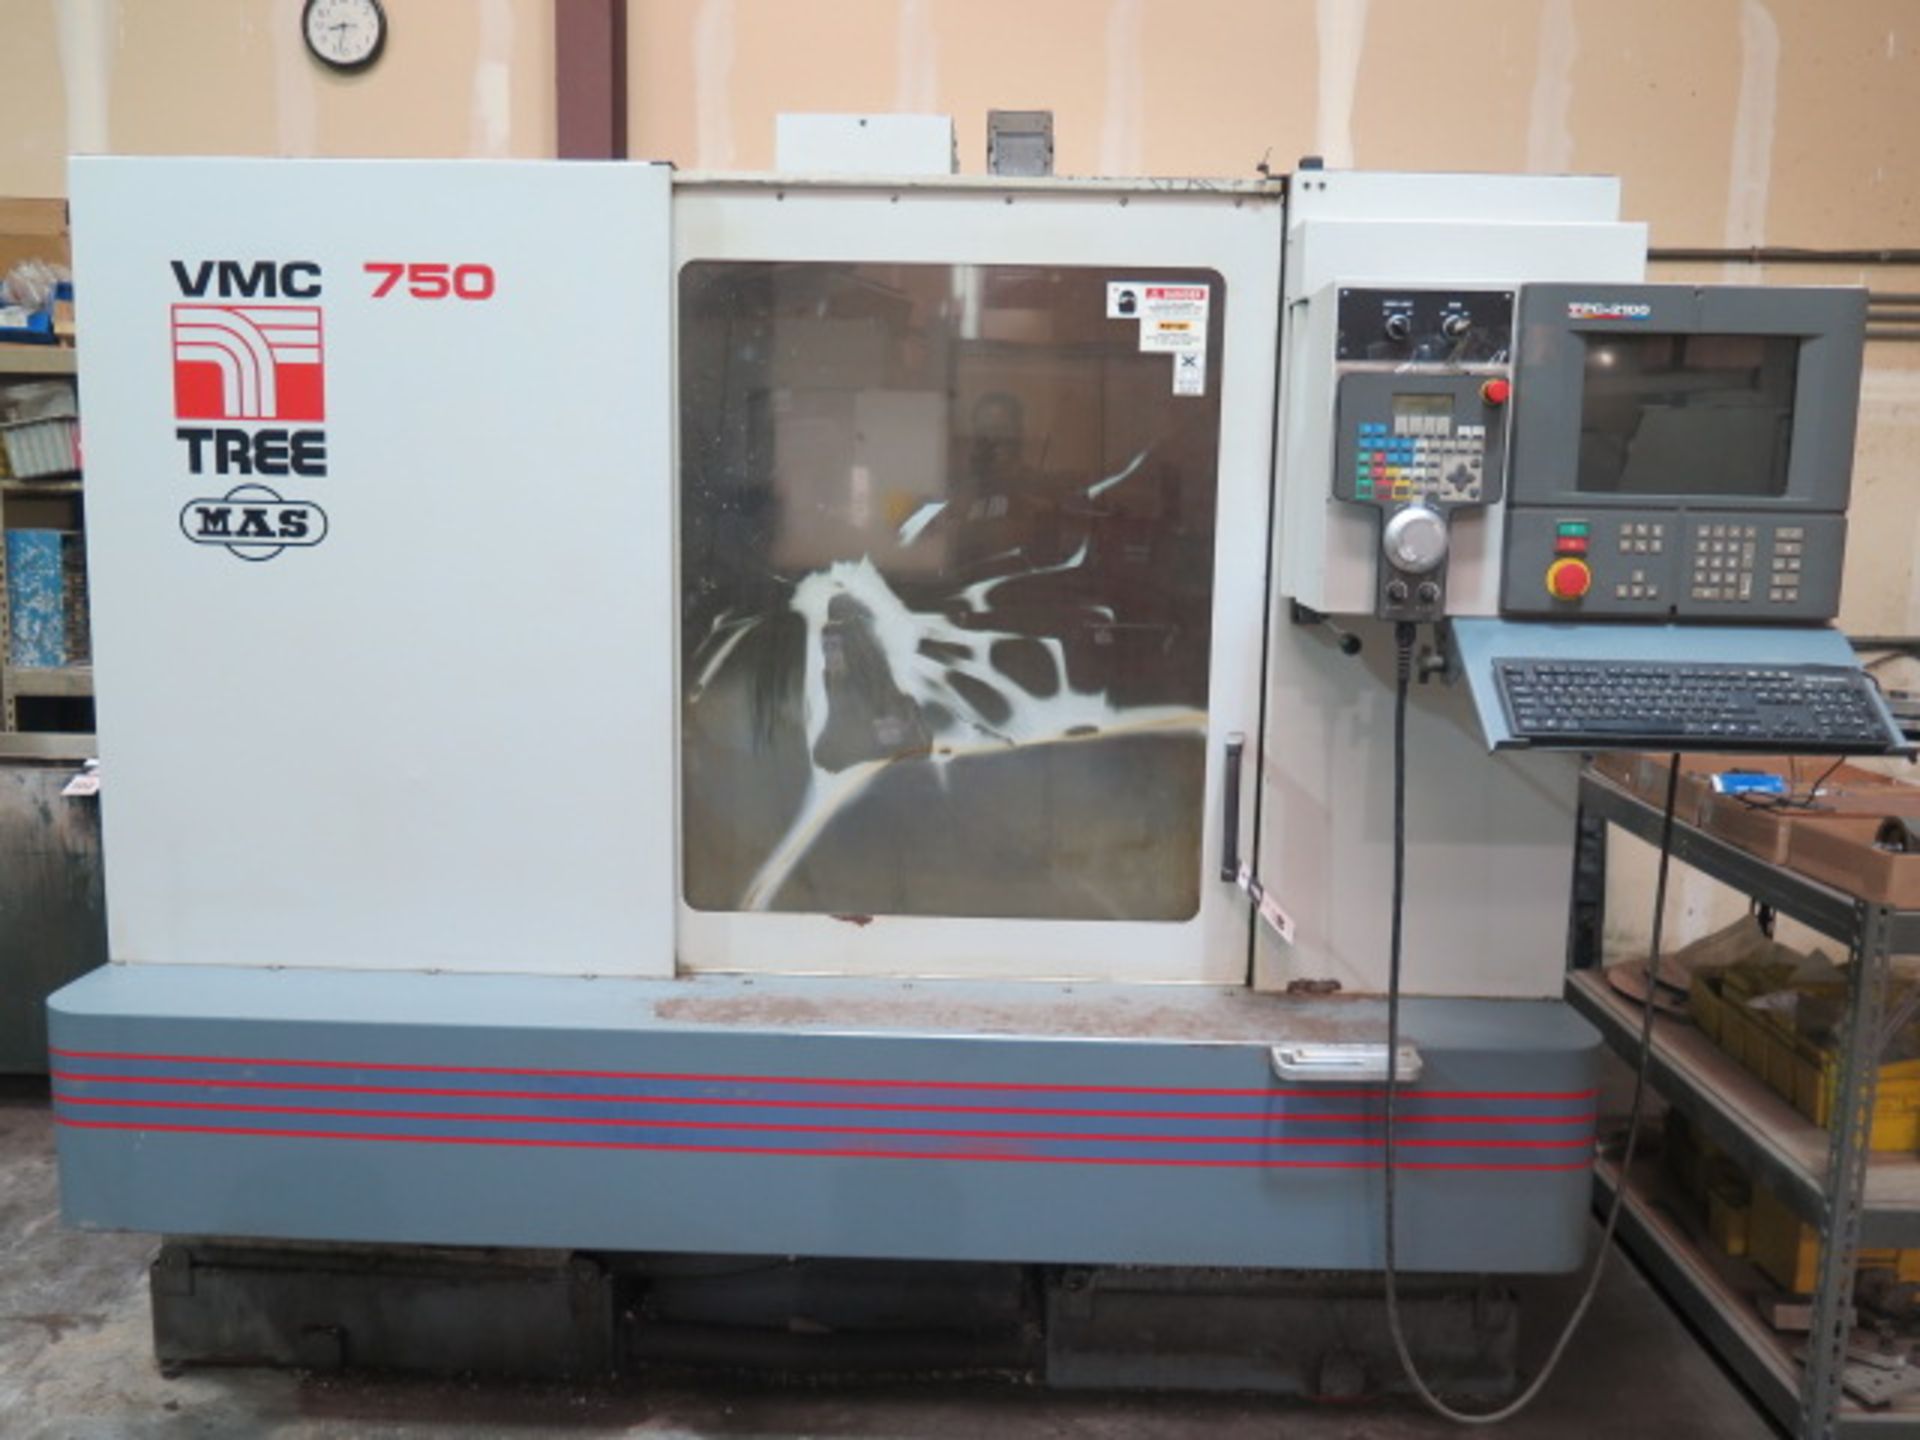 Tree / MAS VMC750 CNC Vertical Machining Center s/n 985961201 w/ Tree PC-2100 Controls, SOLD AS IS